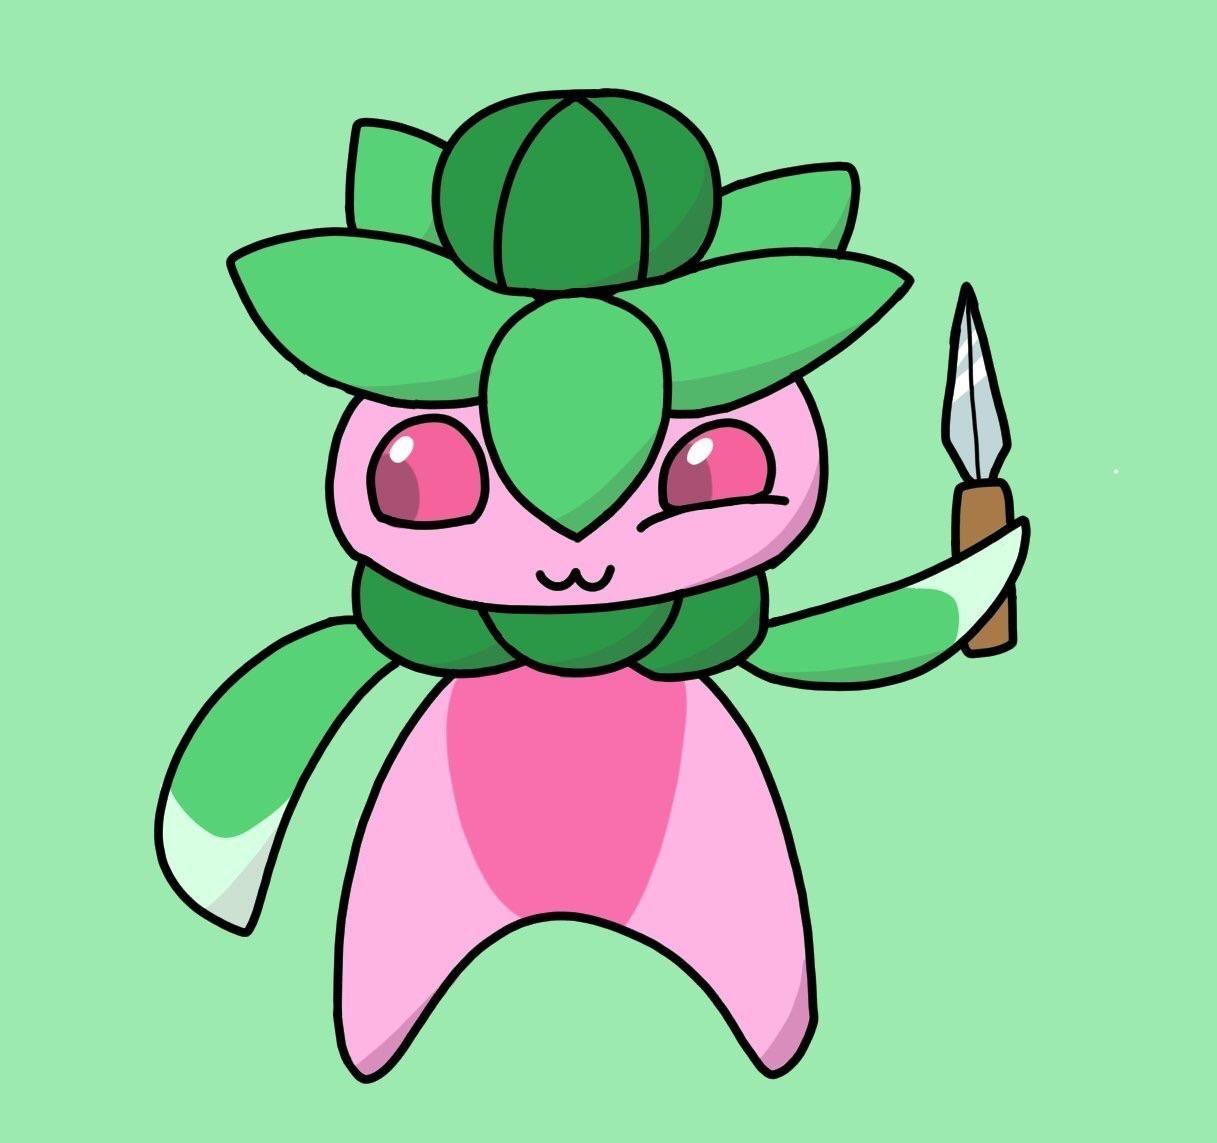 Fomantis with a knife because why not?